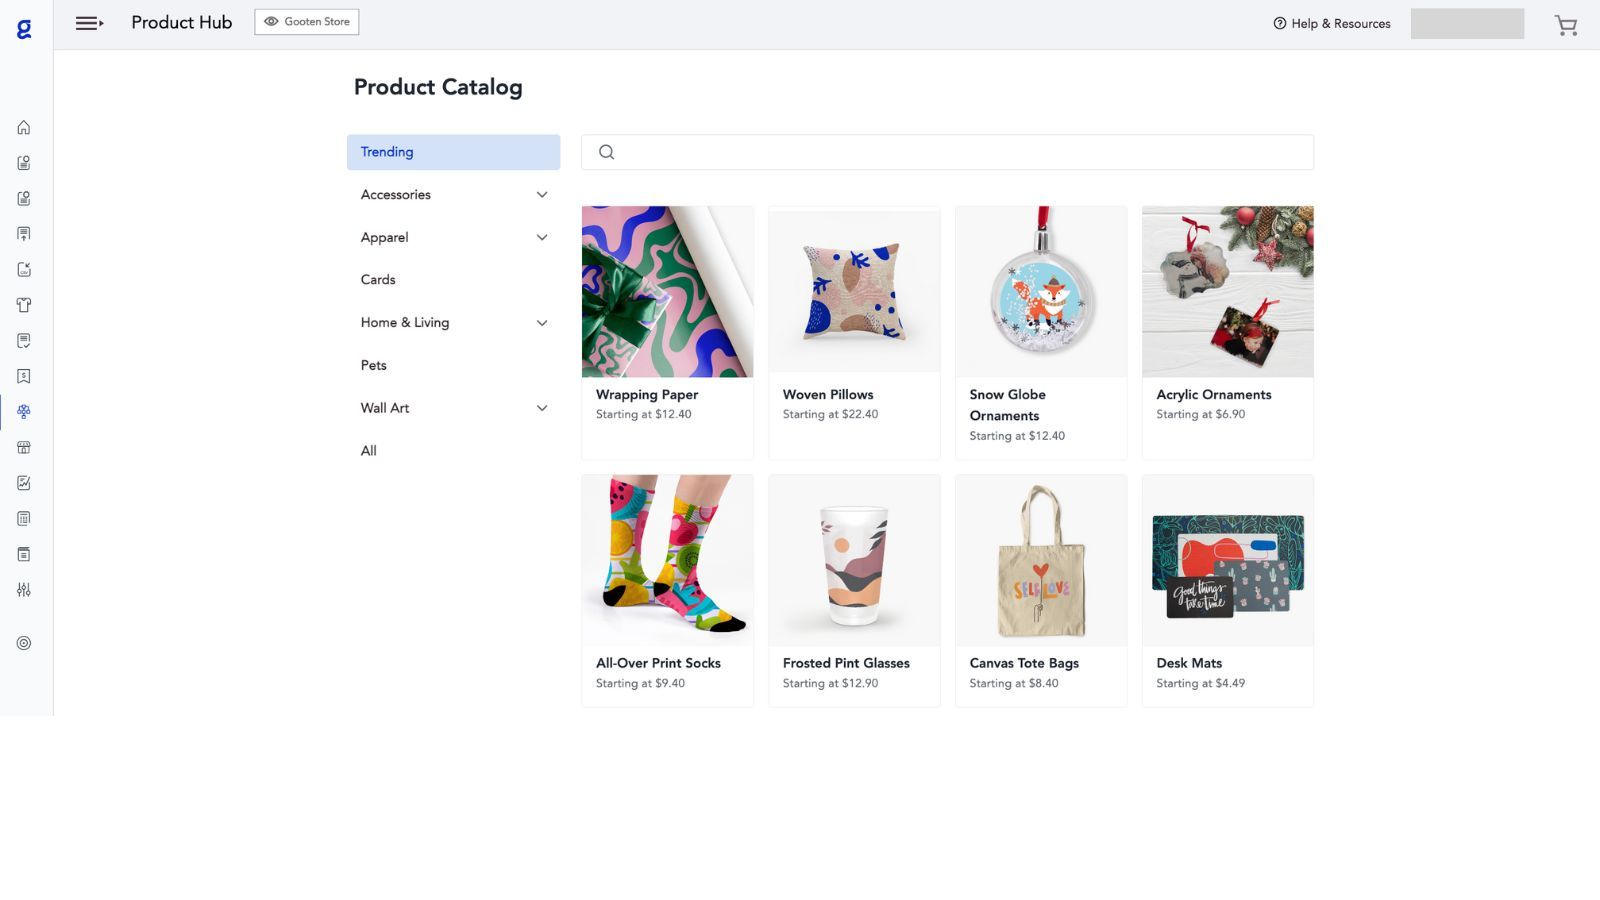 Select a product to design and add to your store